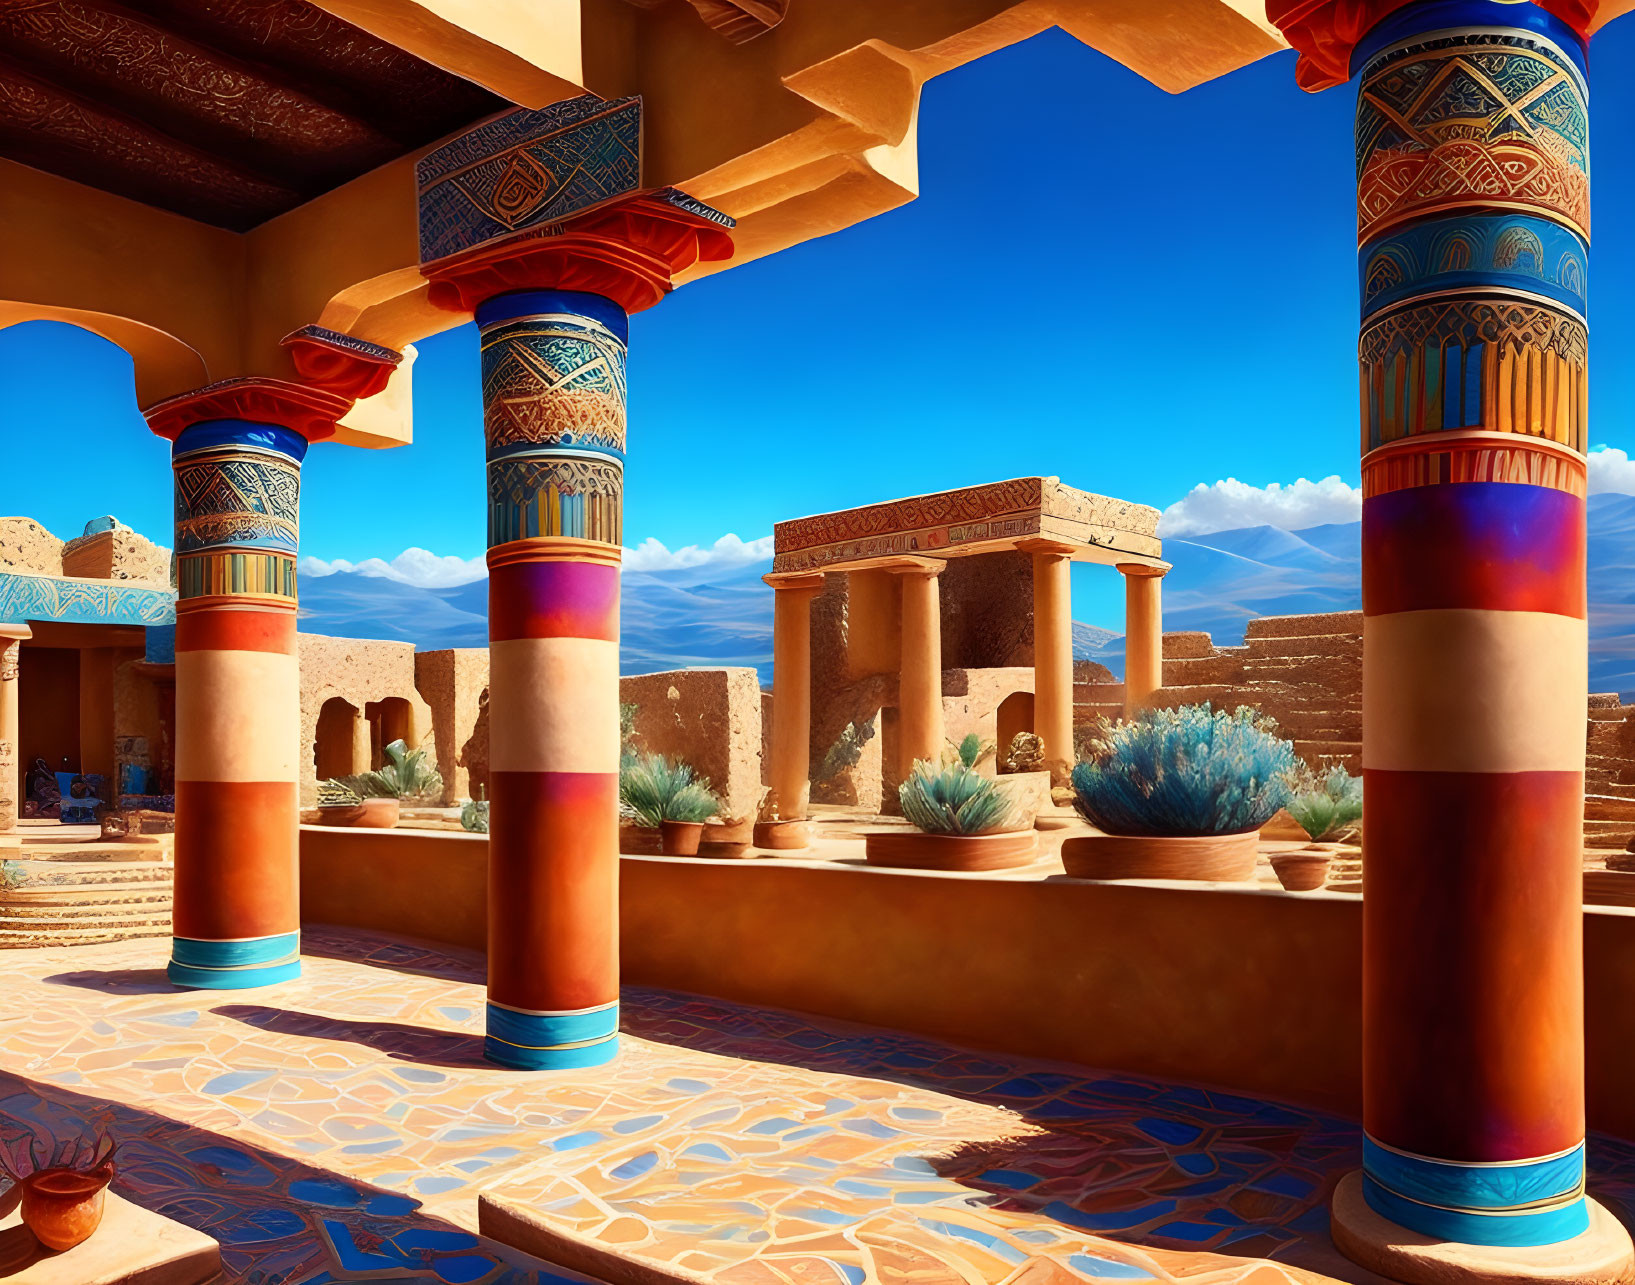 Colorful painted pillars in traditional architectural setting under blue sky with desert landscape.